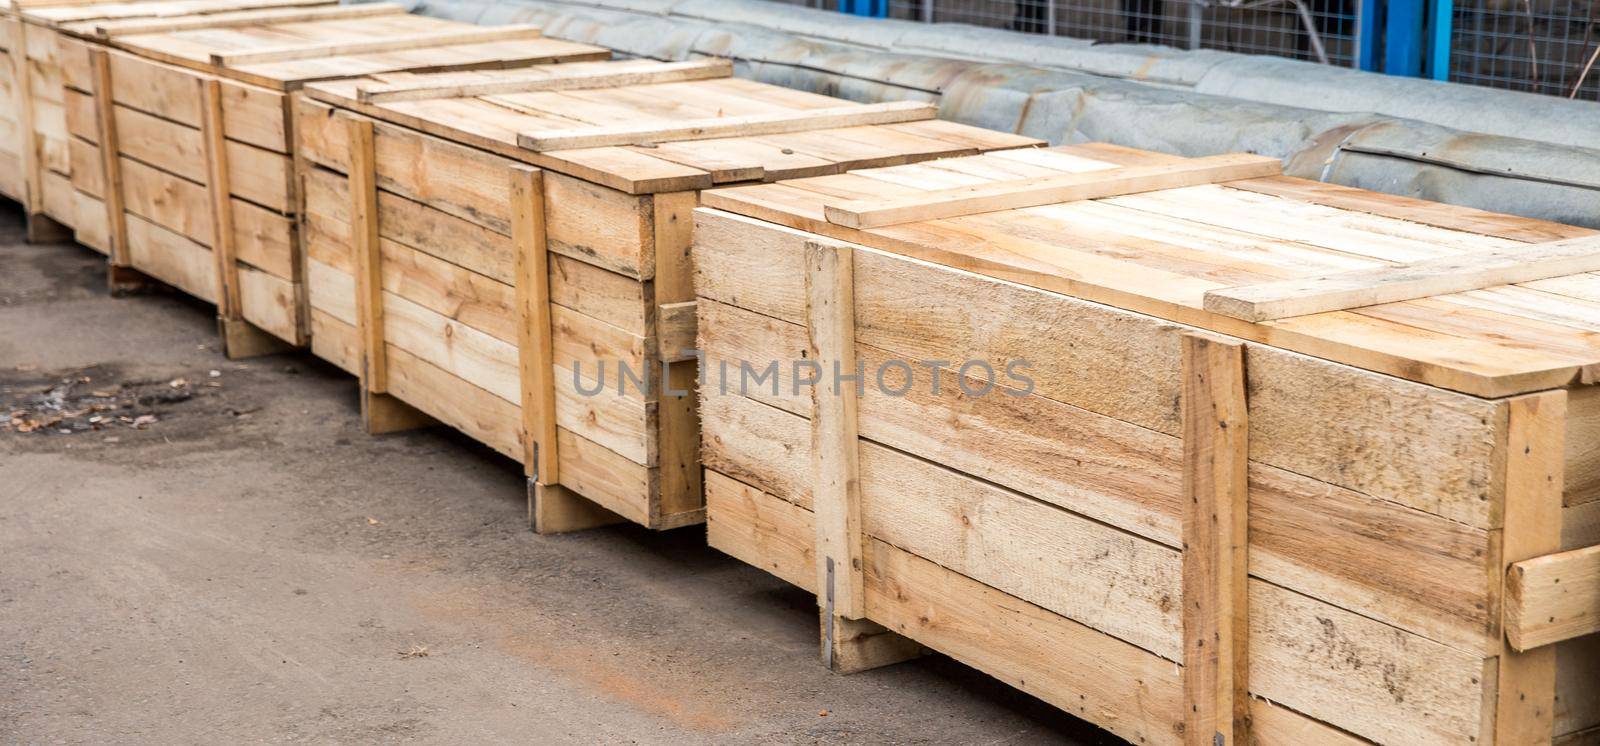 Many big wooden cargo containers standing outdoors ready to be shipped